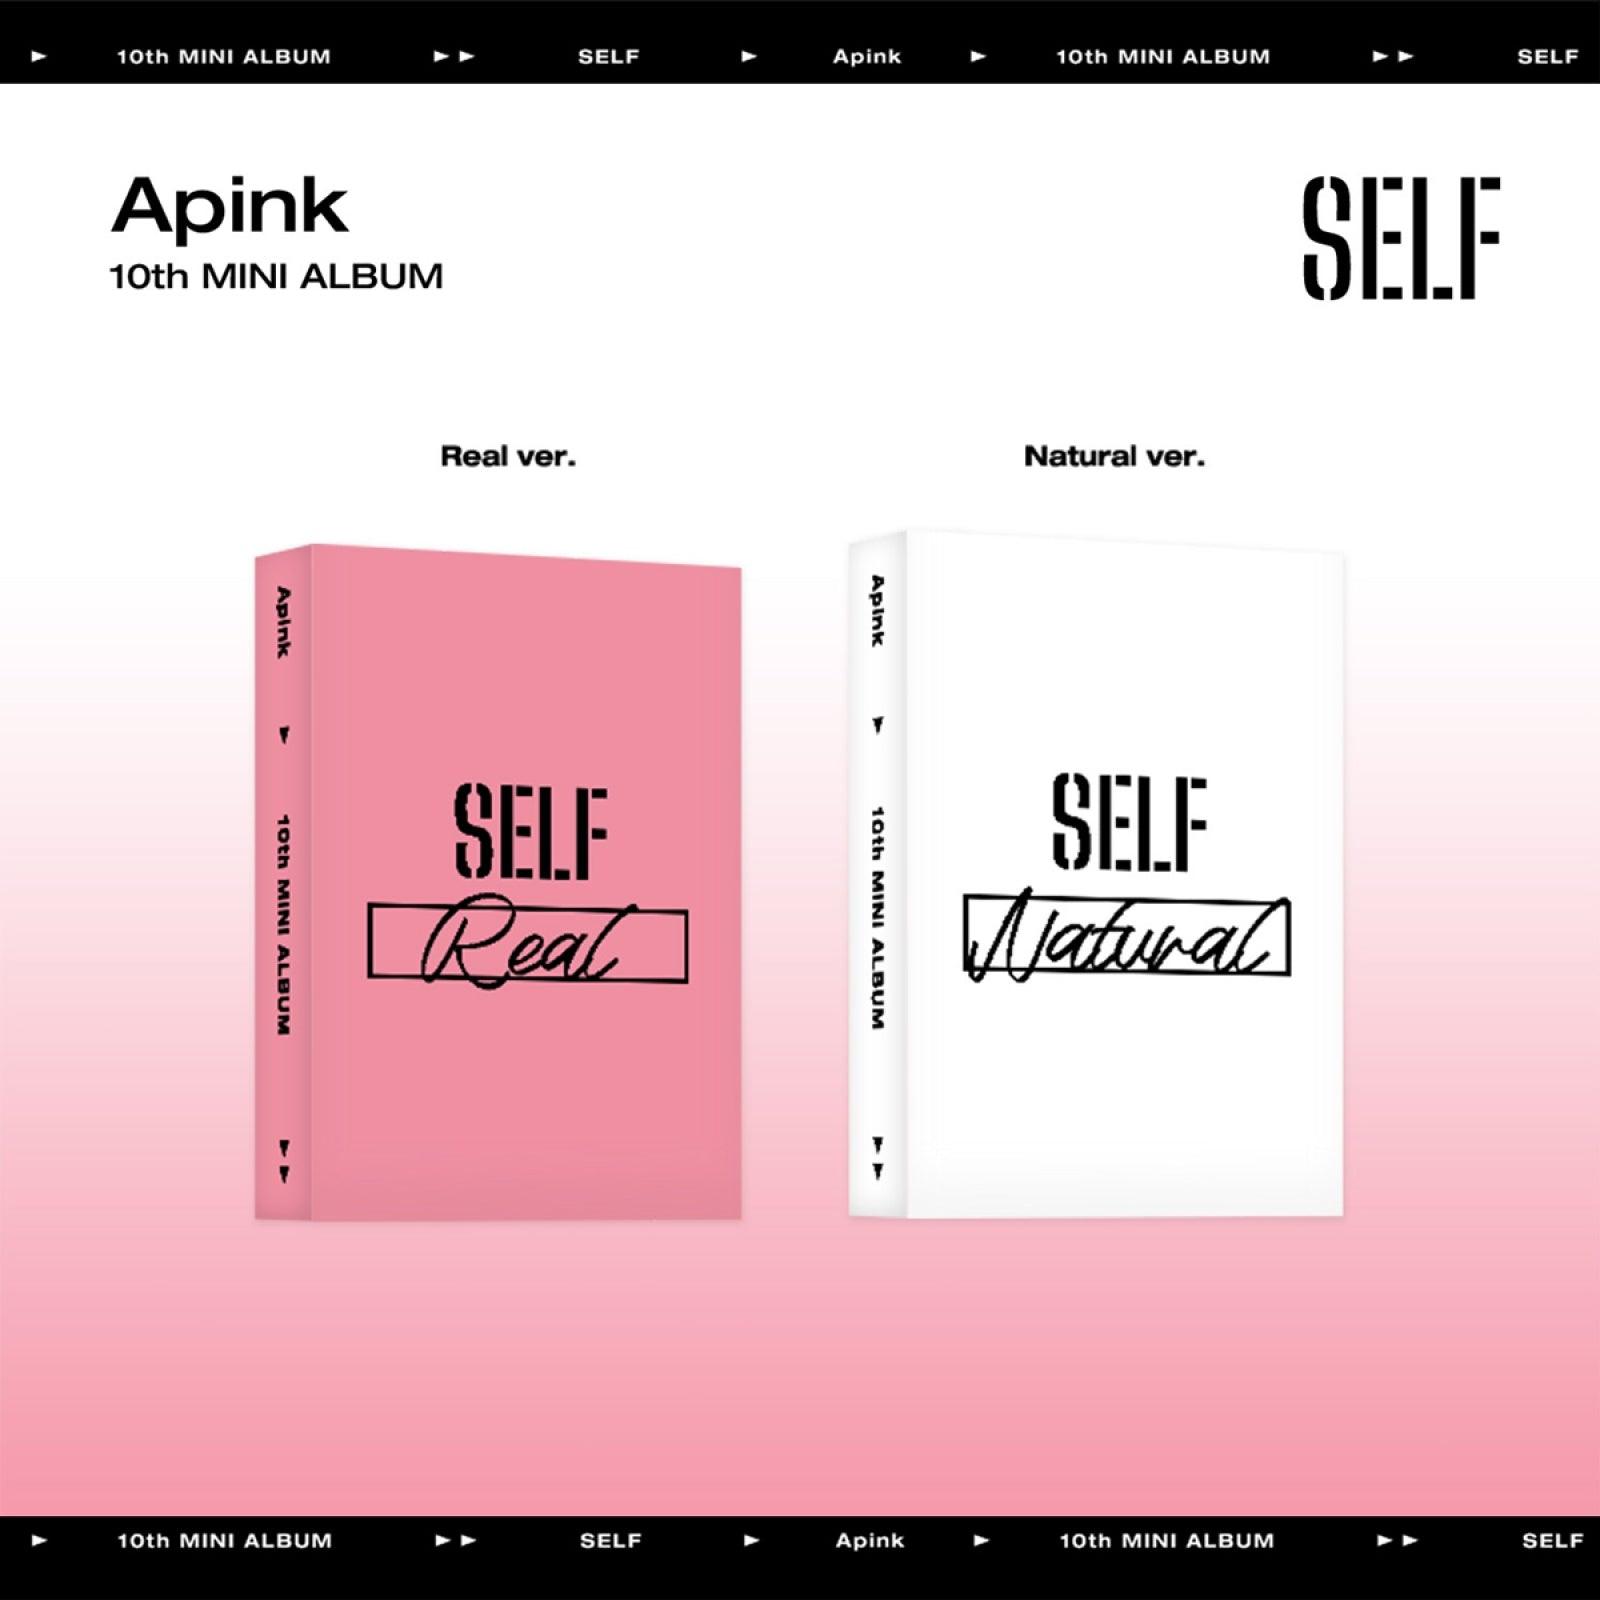 [PRE-ORDER] APINK - SELF / 10th Mini Album (Platform ver.) (Real ver. / Natural ver.) - Shopping Around the World with Goodsnjoy